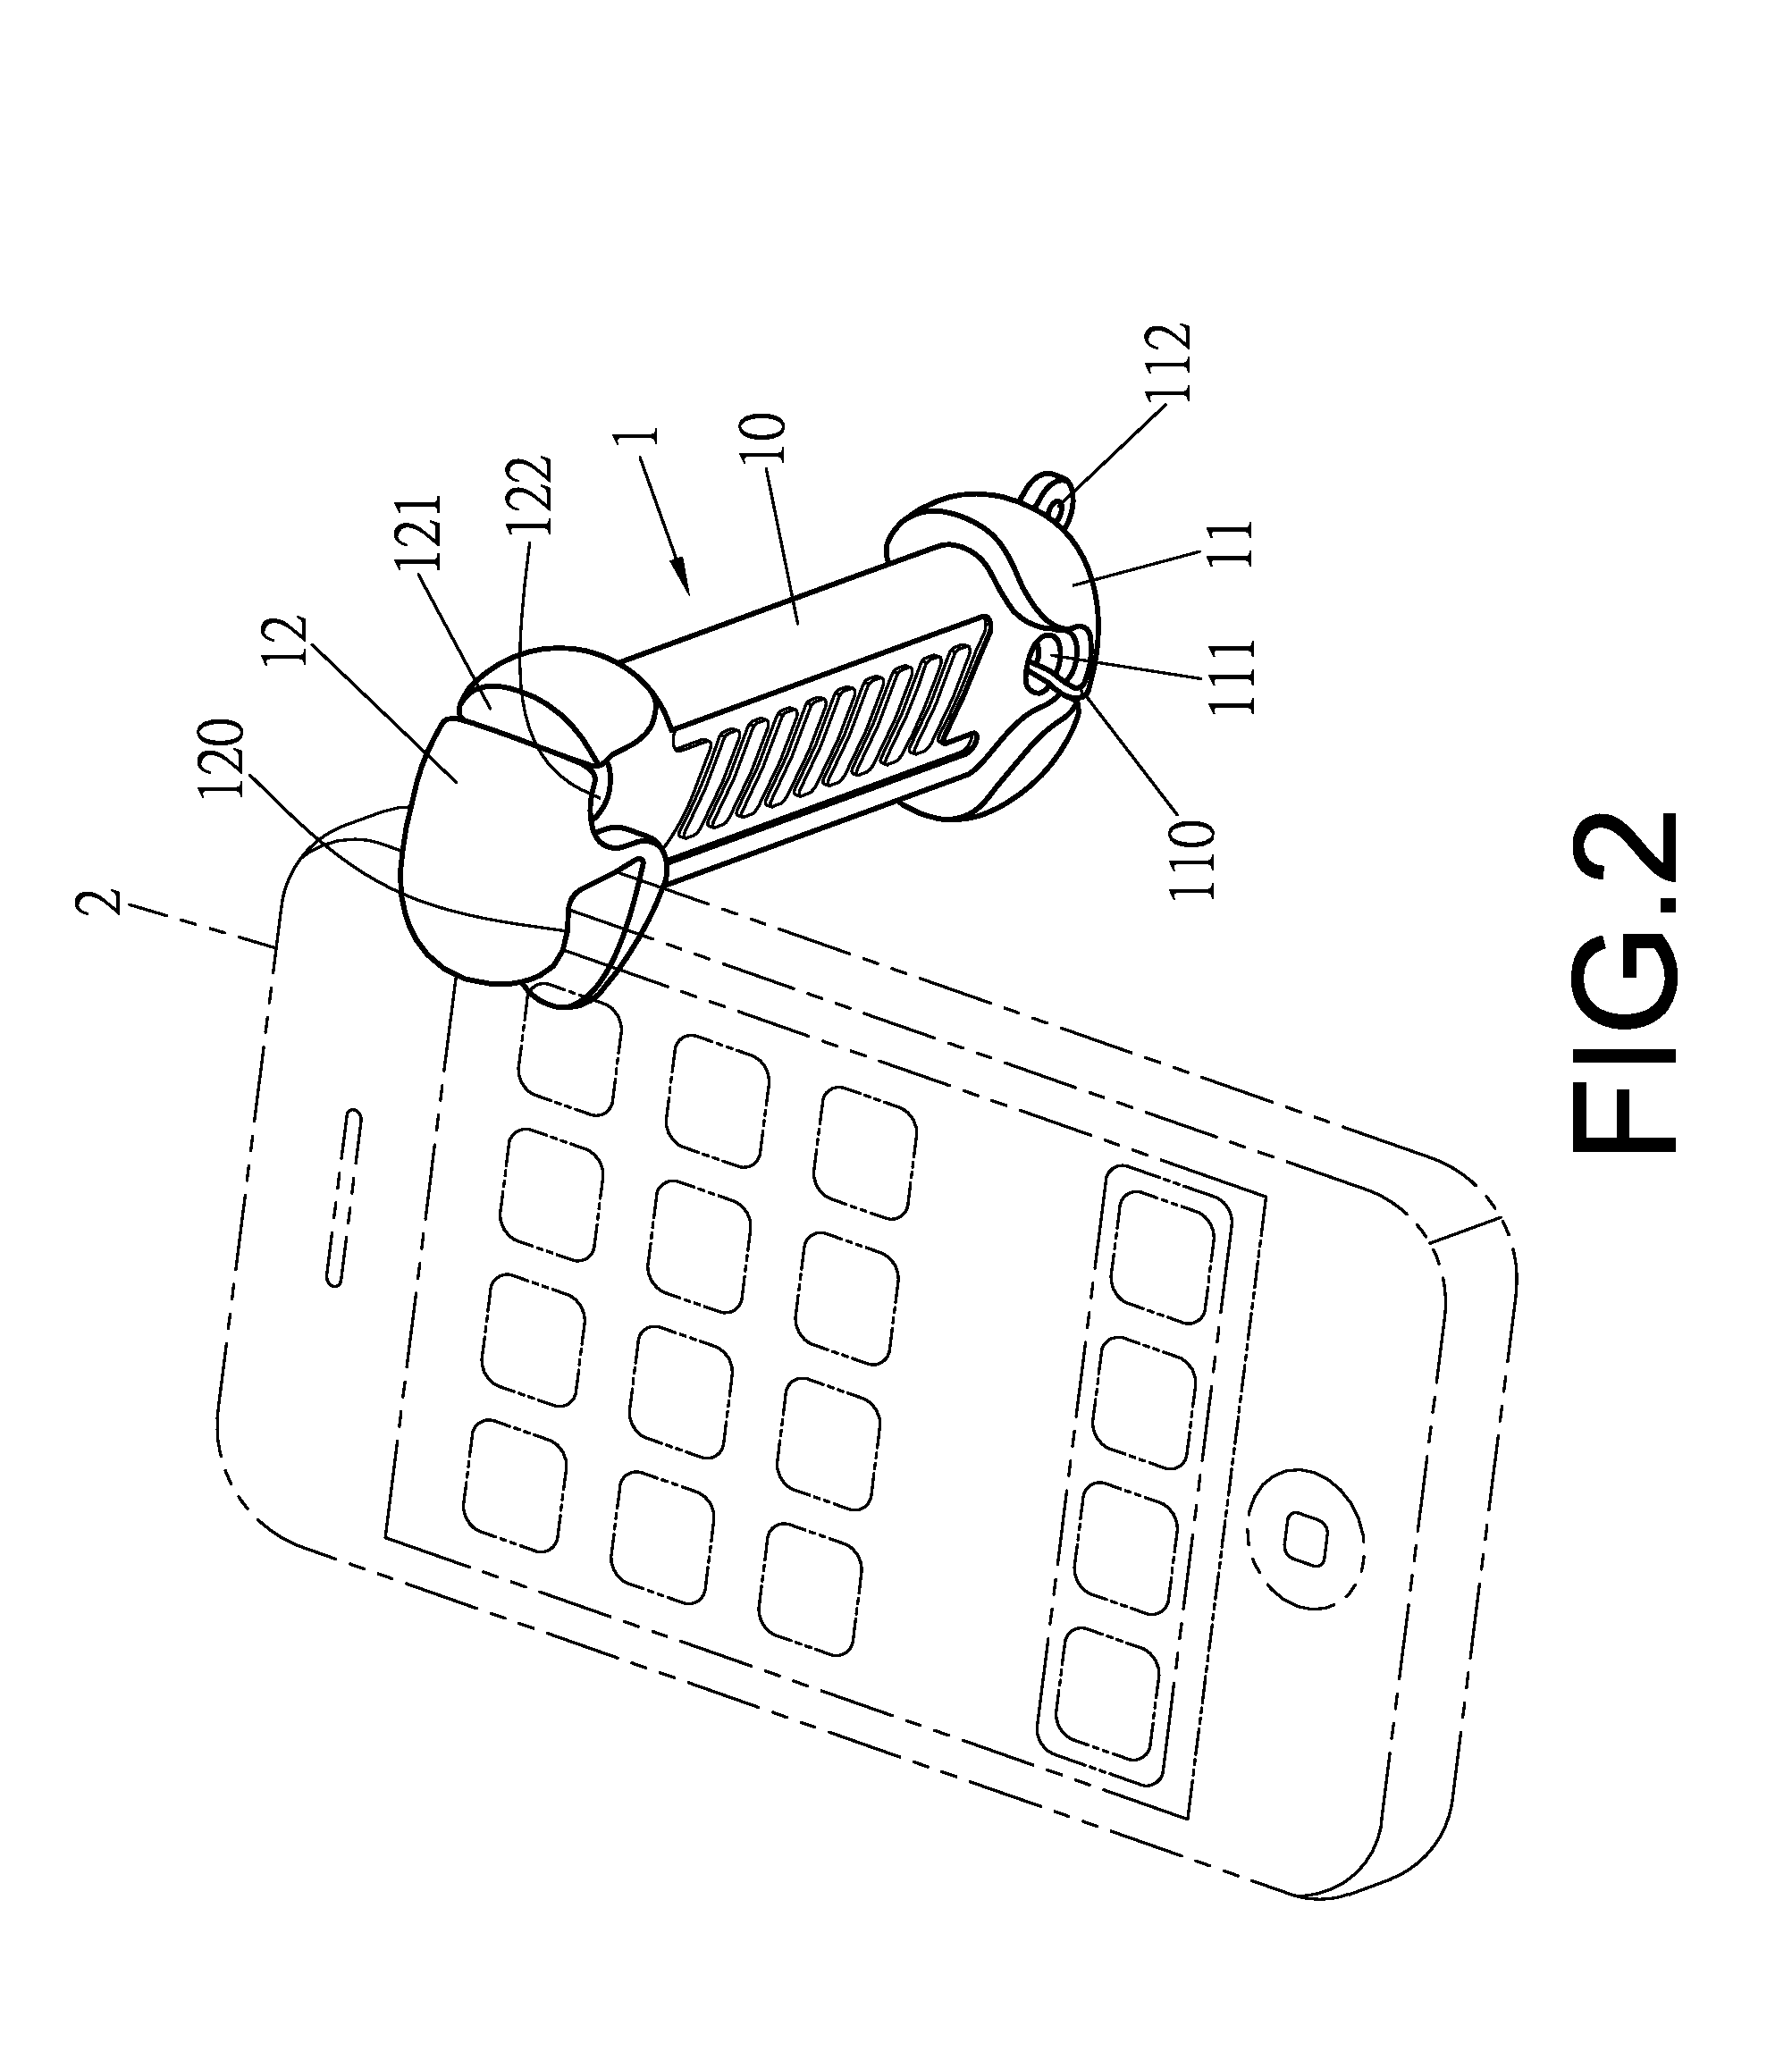 Holder of a portable electric device